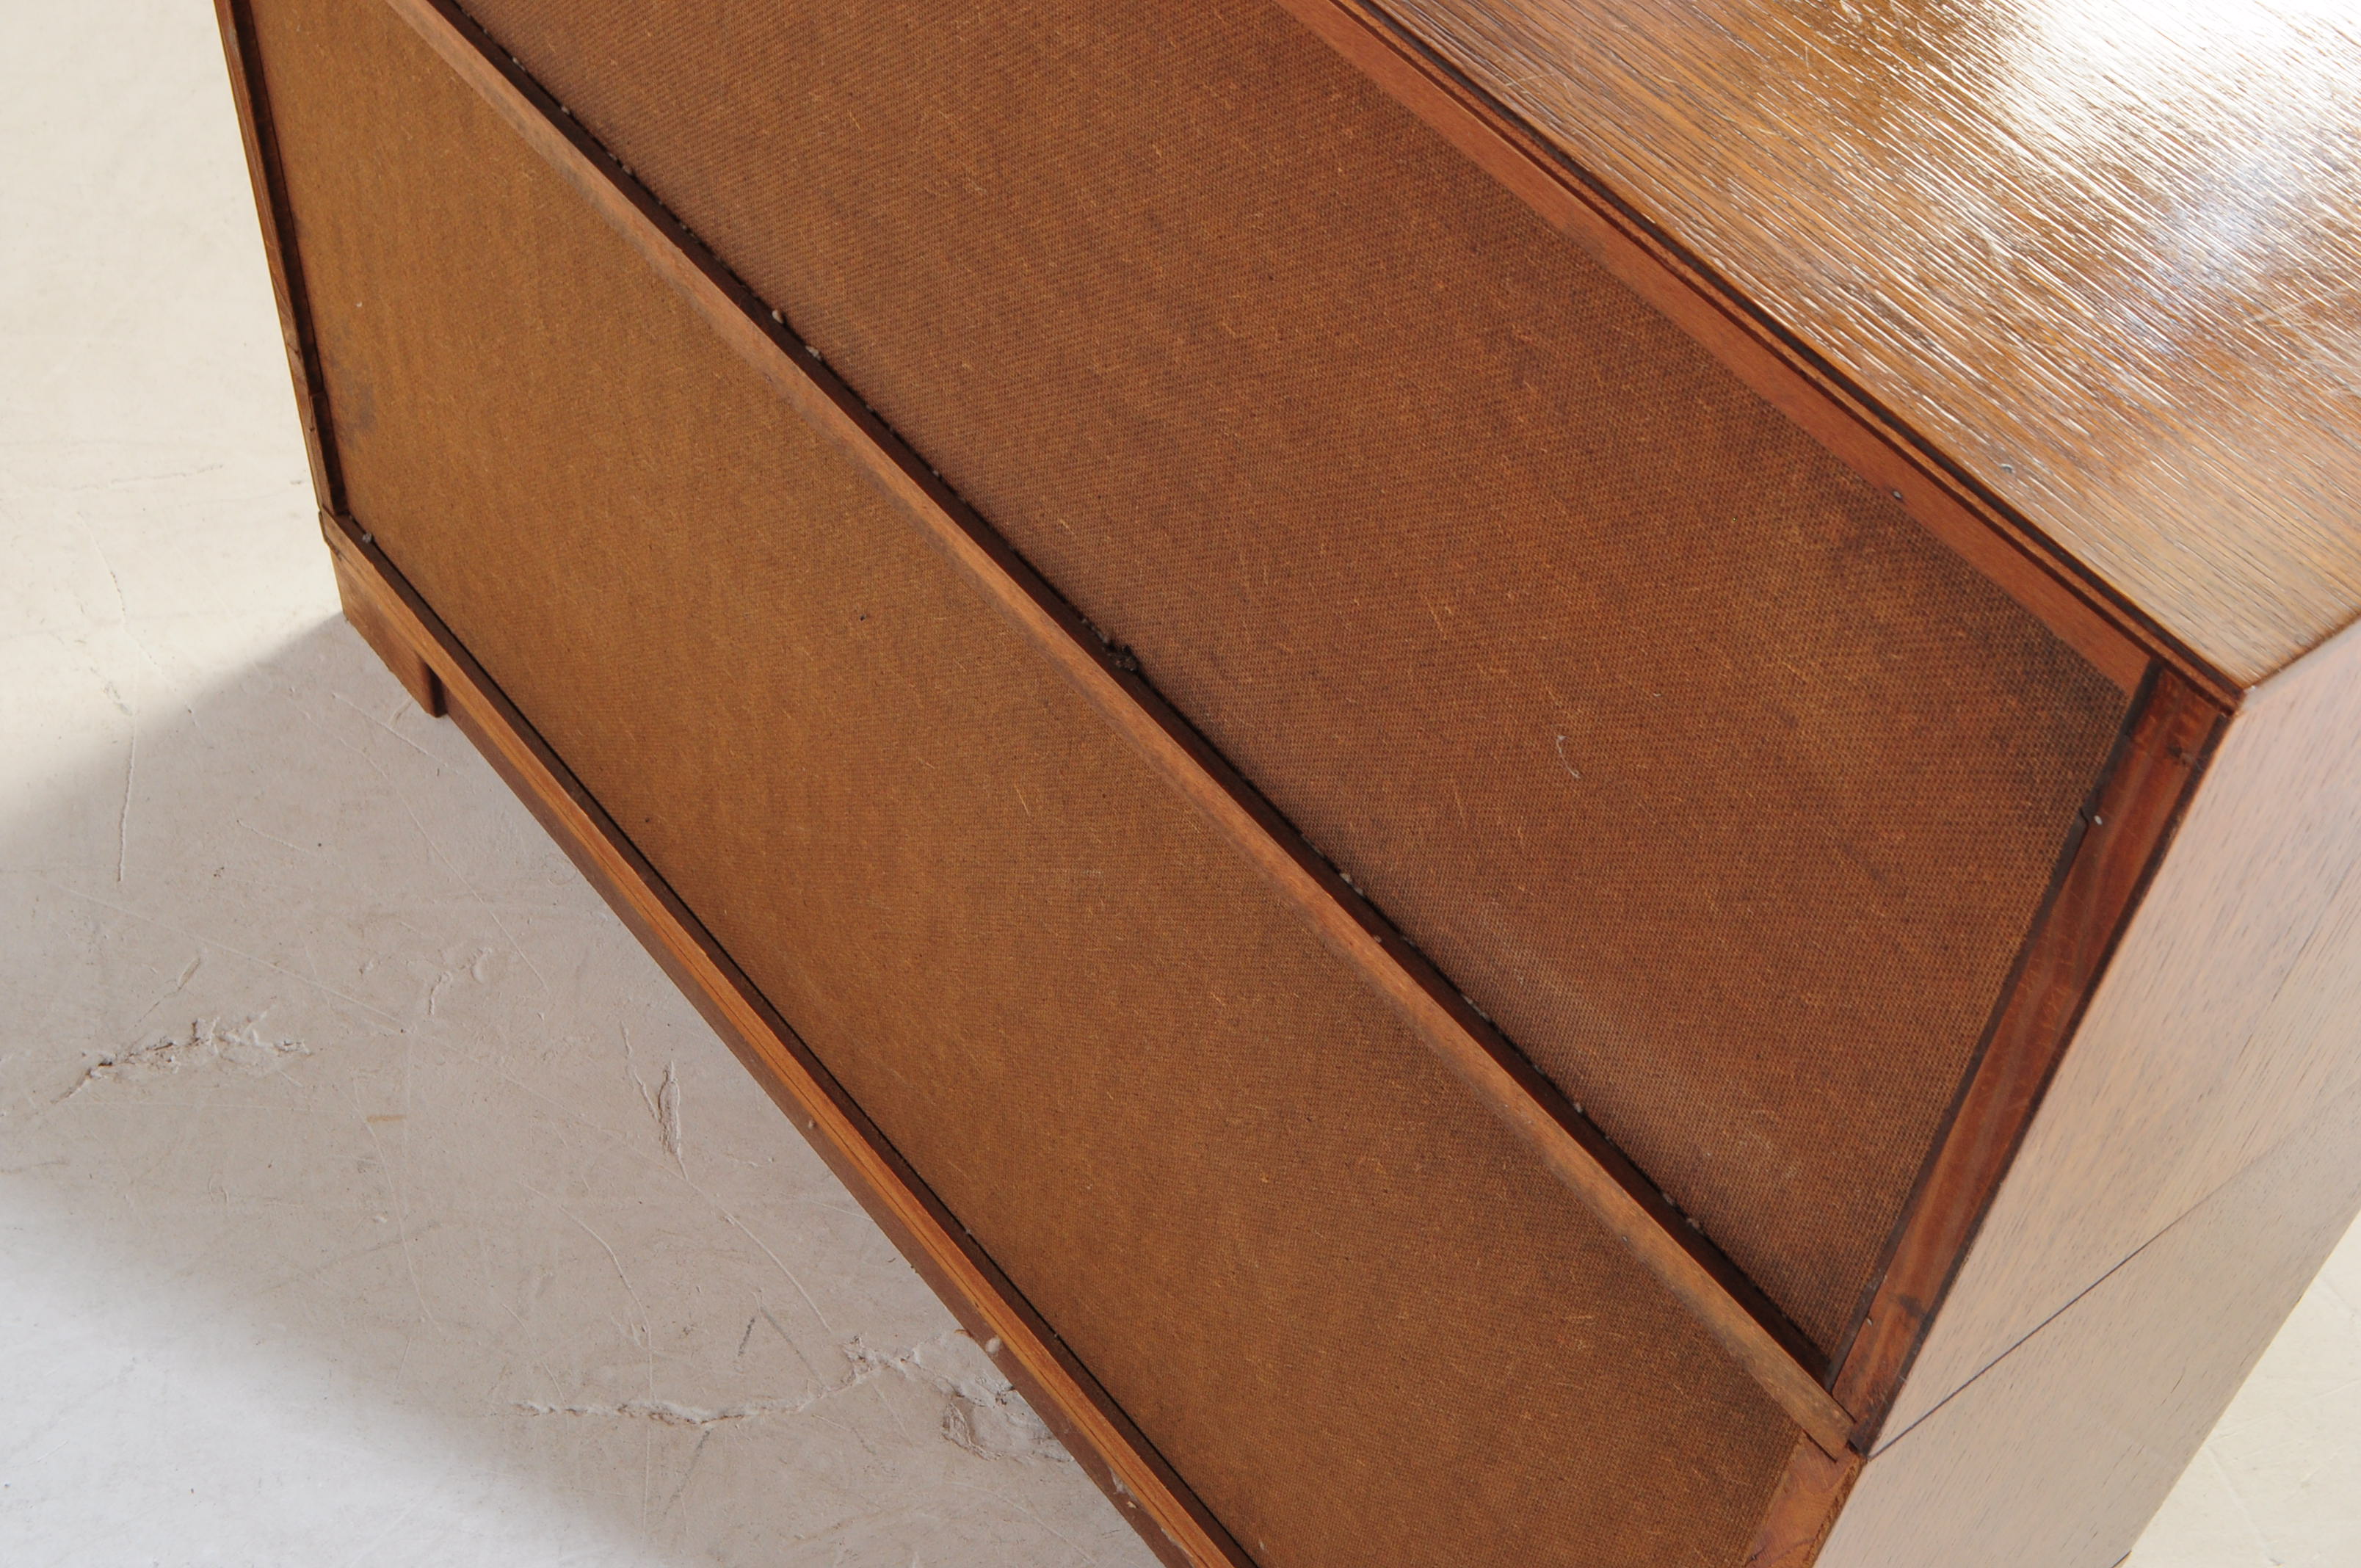 MINTY - MID CENTURY OAK TWIN STACK LAWYERS BOOKCASE - Image 6 of 6